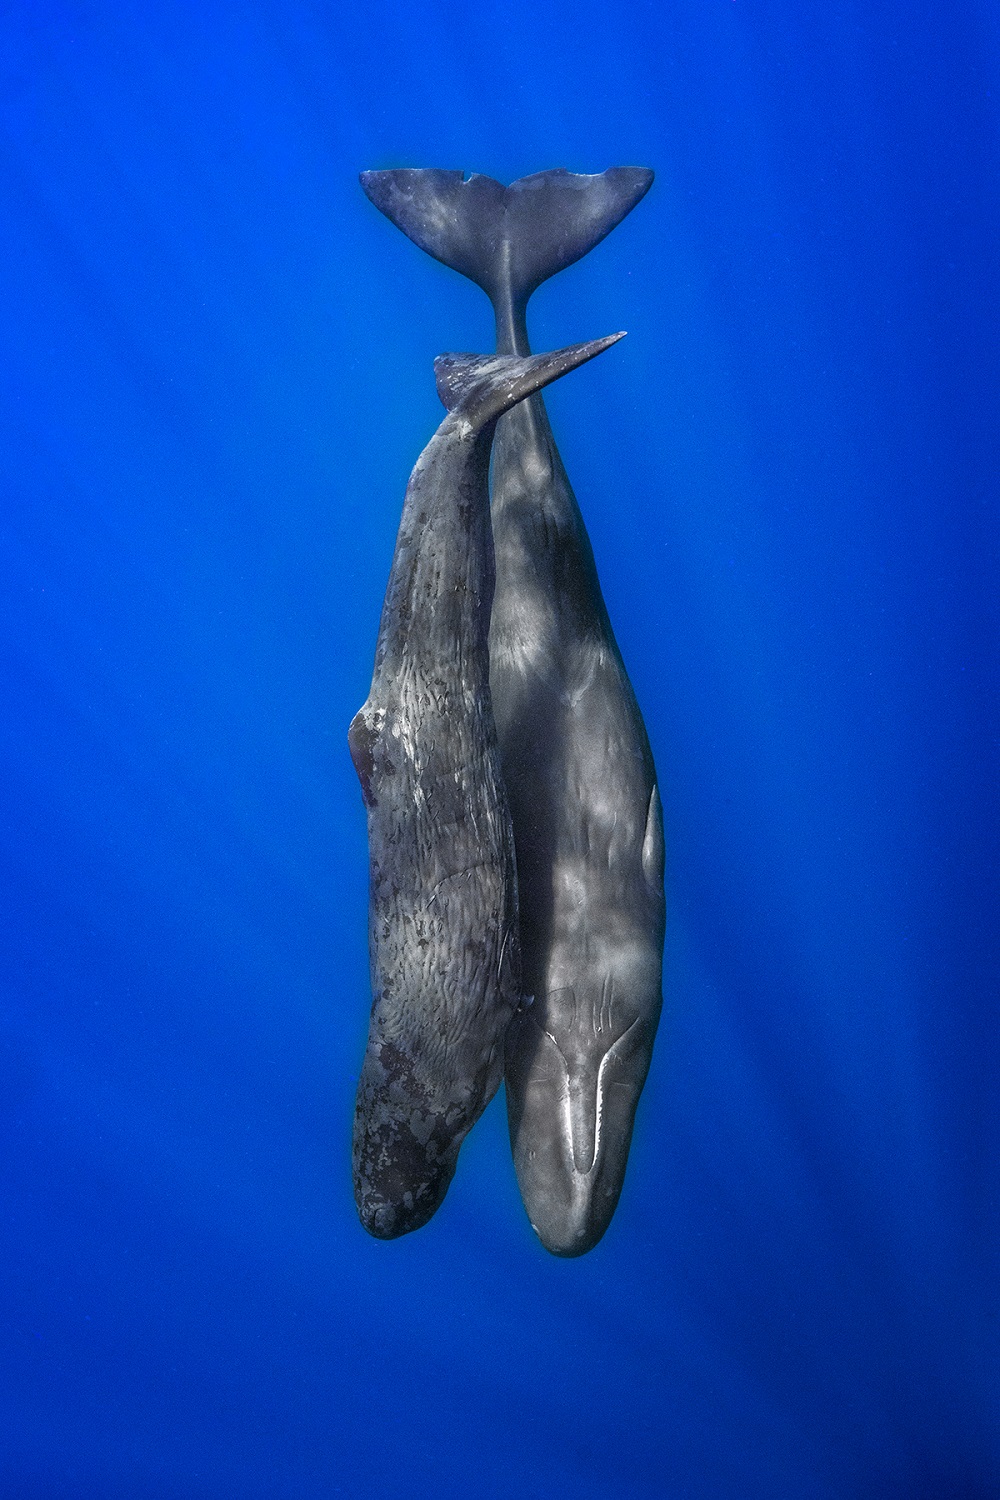 Sperm whale calf and mother swimming